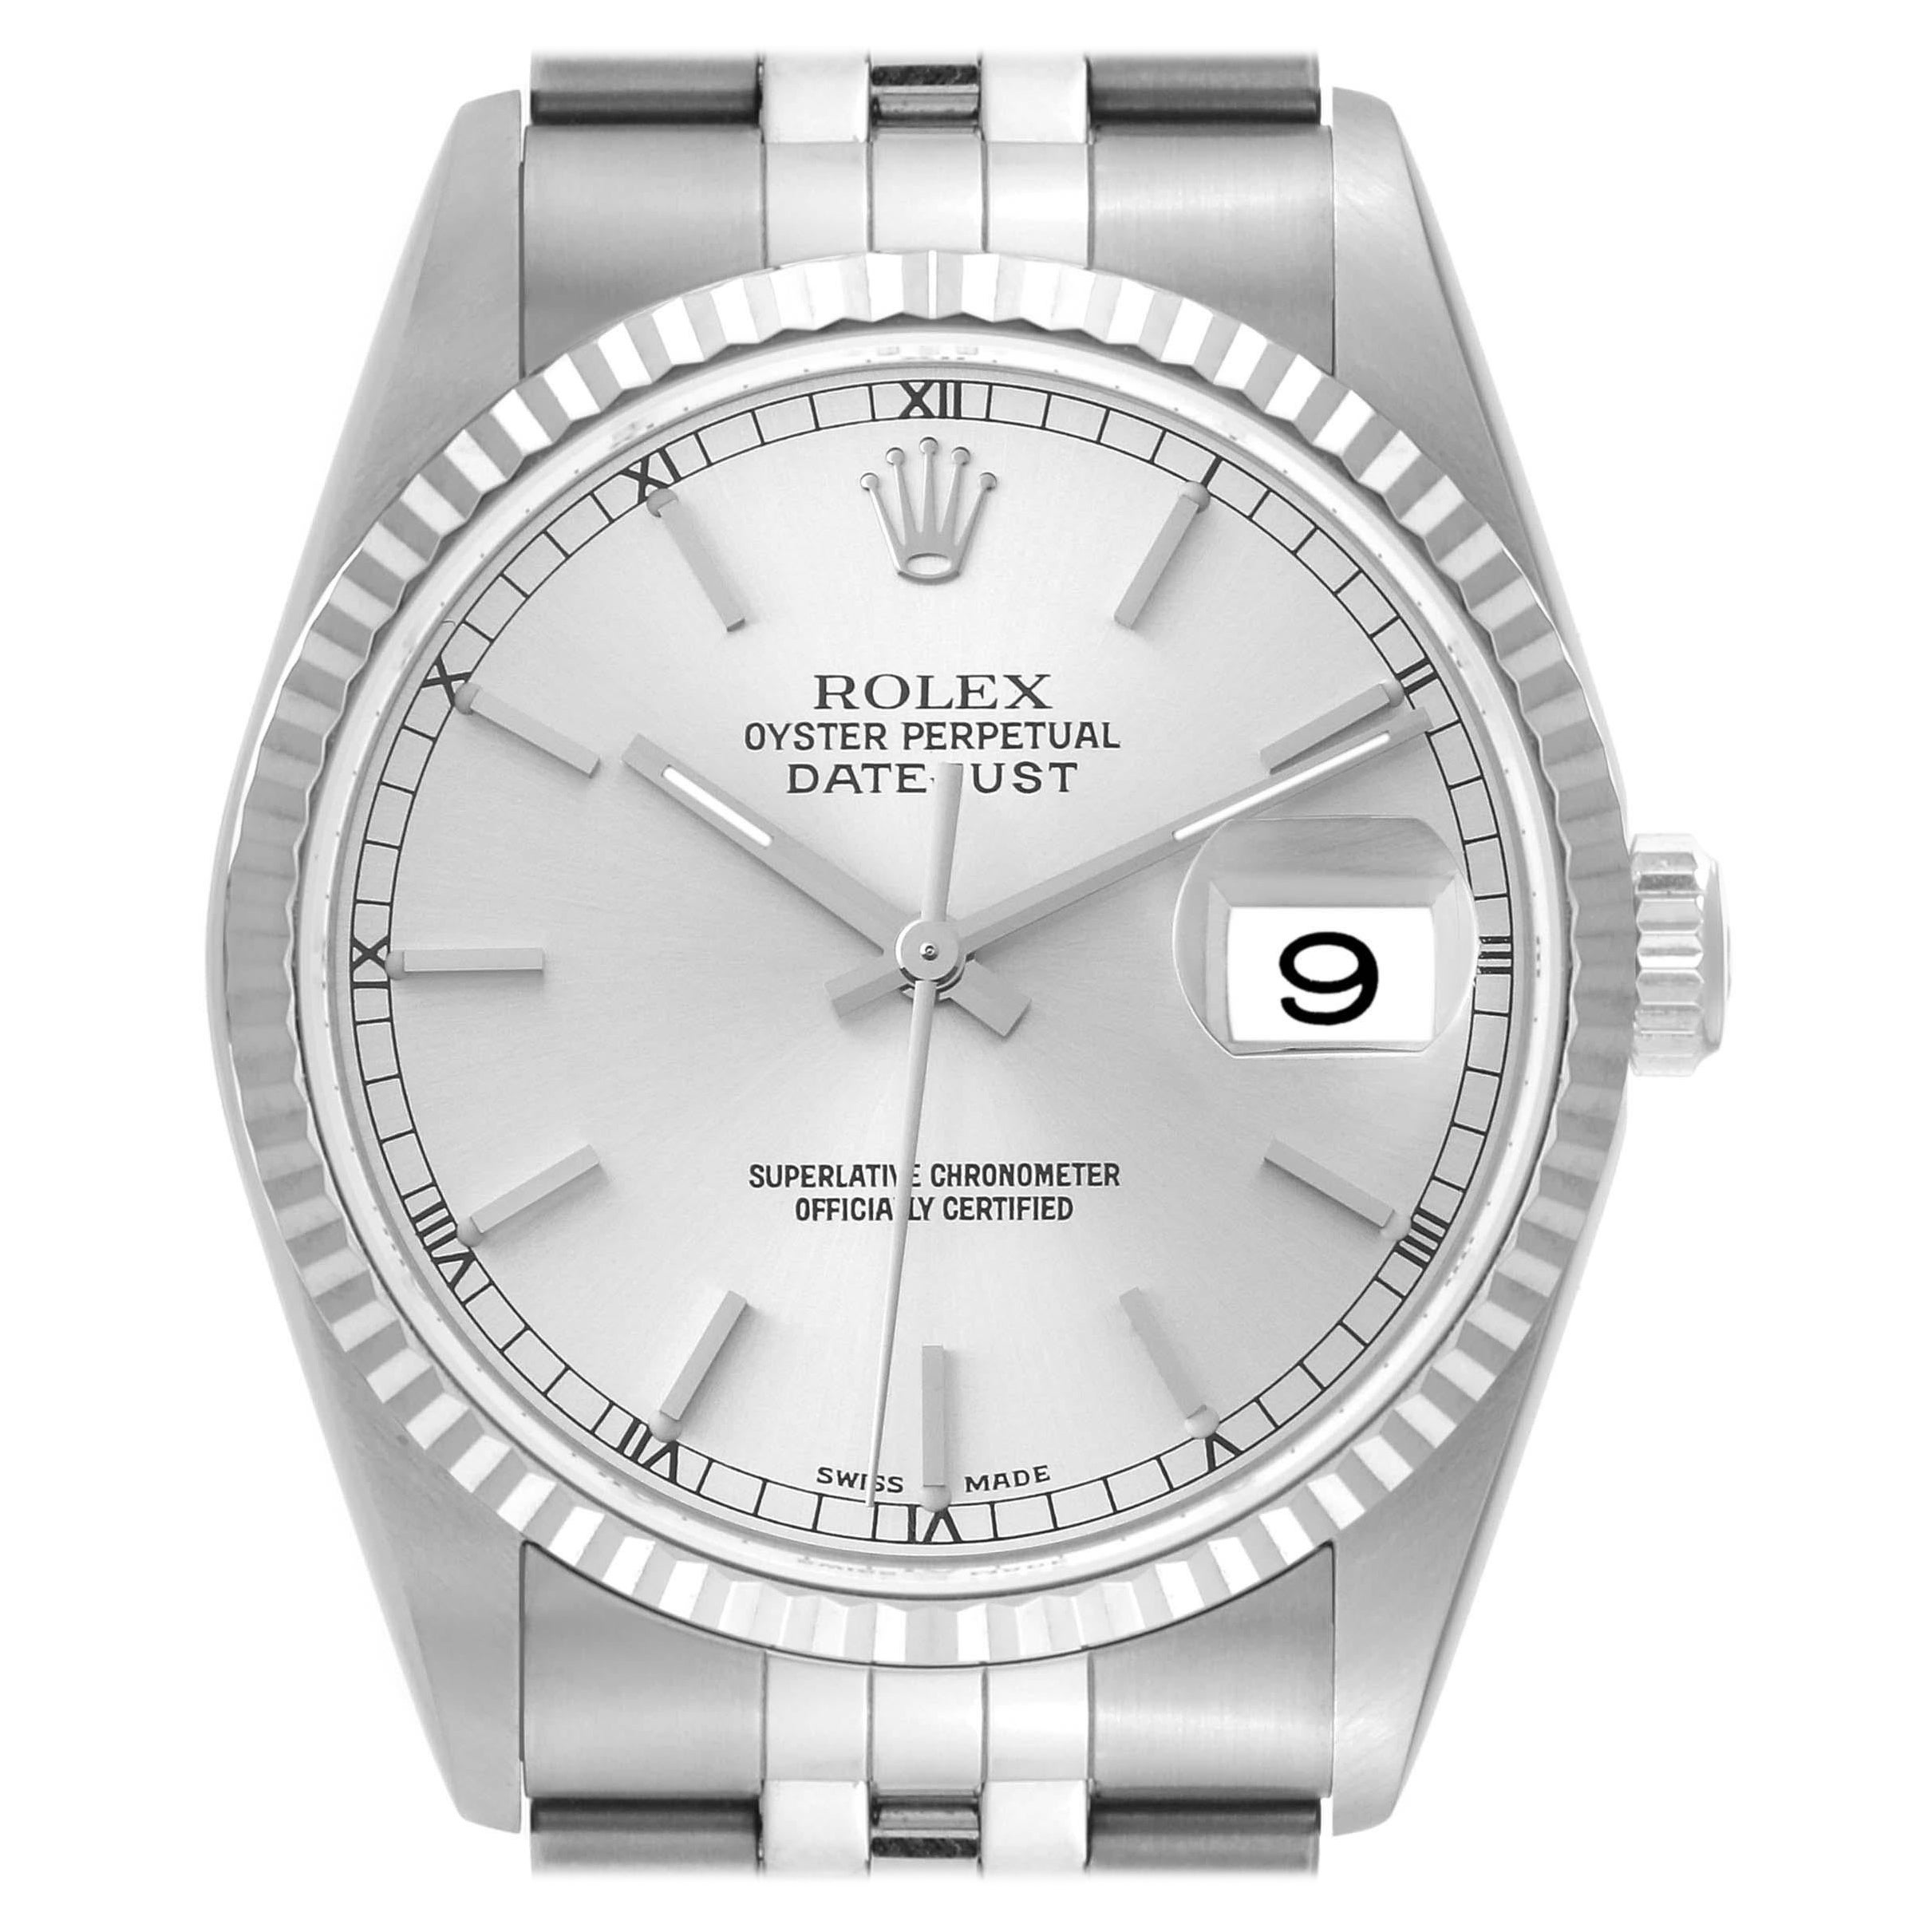 Rolex Datejust Silver Dial Steel White Gold Mens Watch 16234